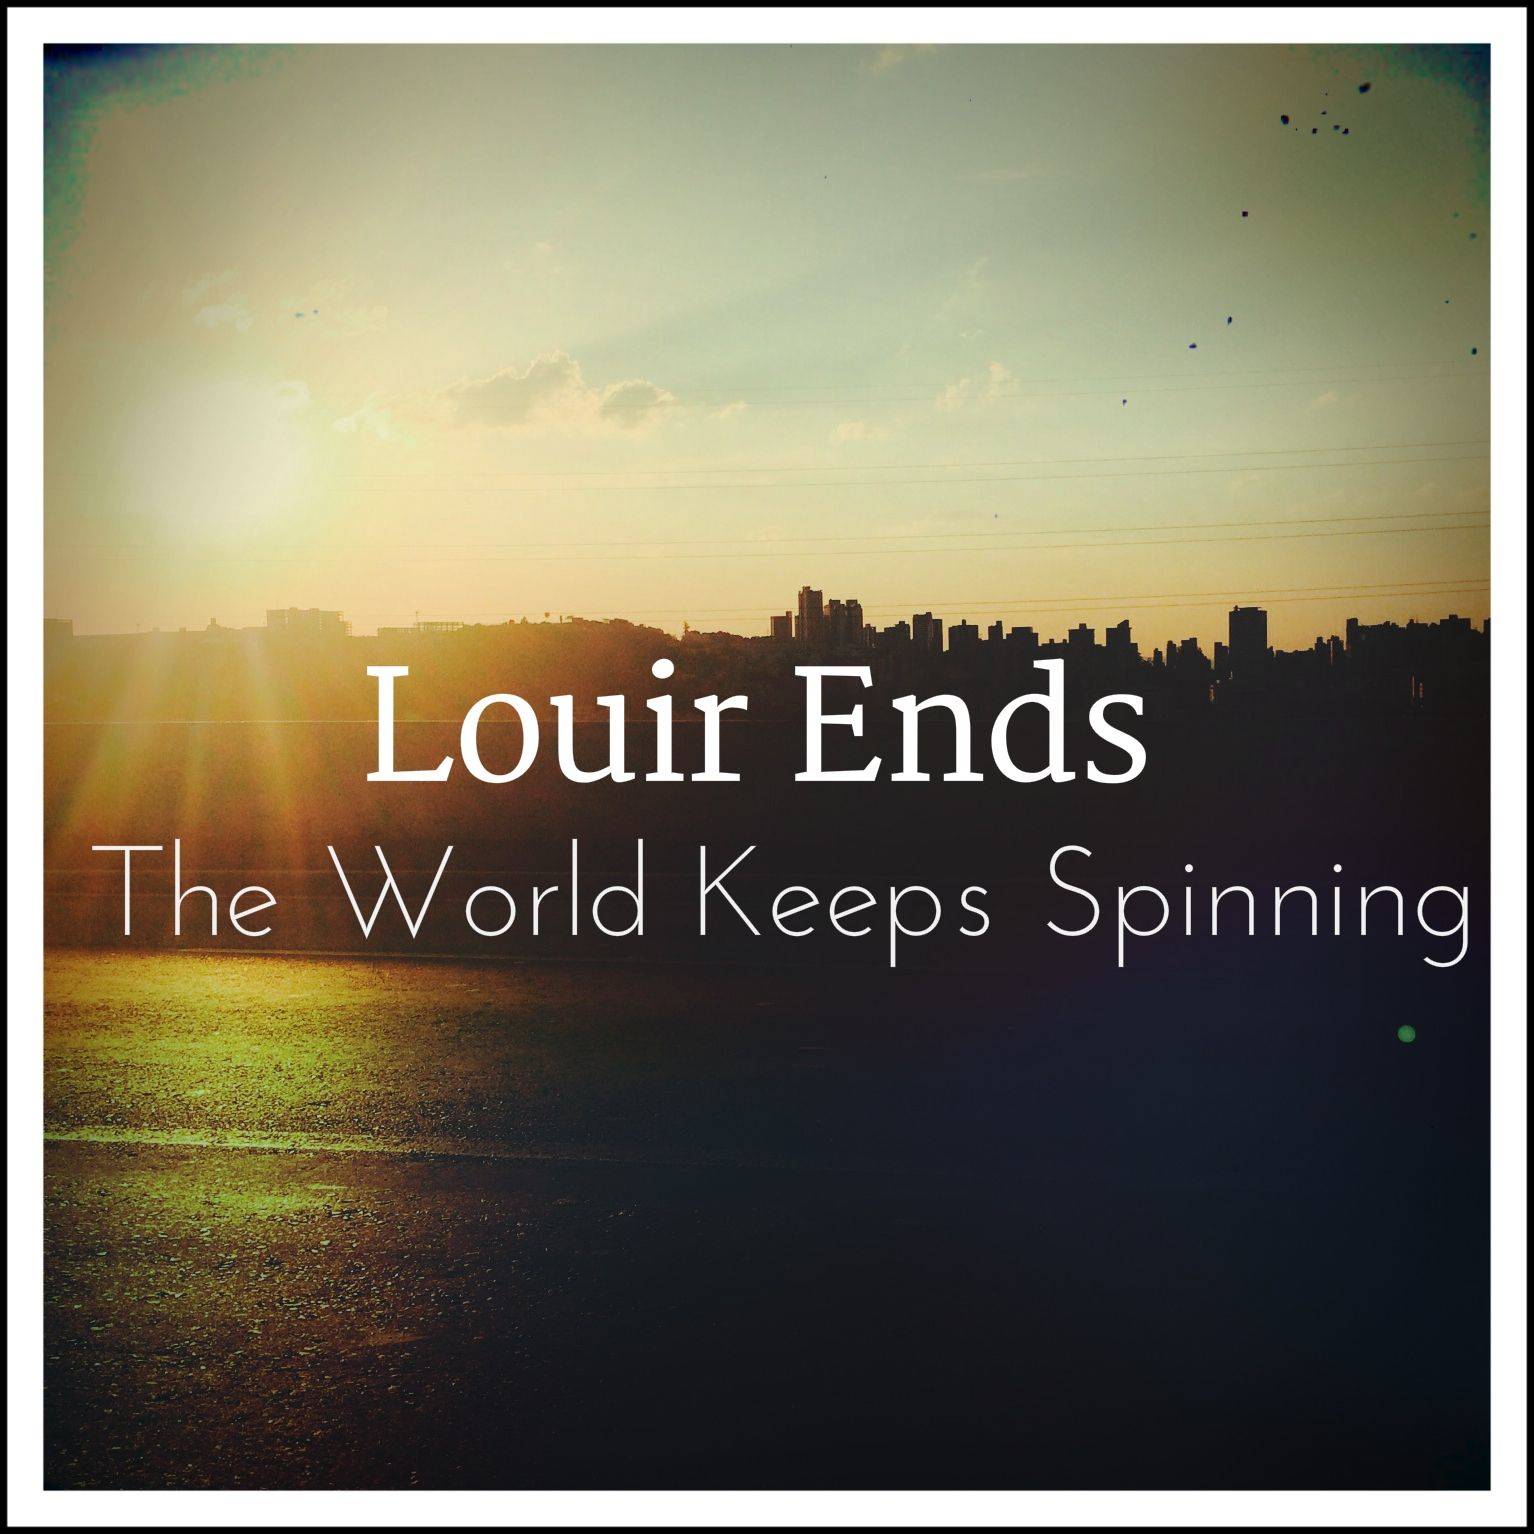 The World Keeps Spinning